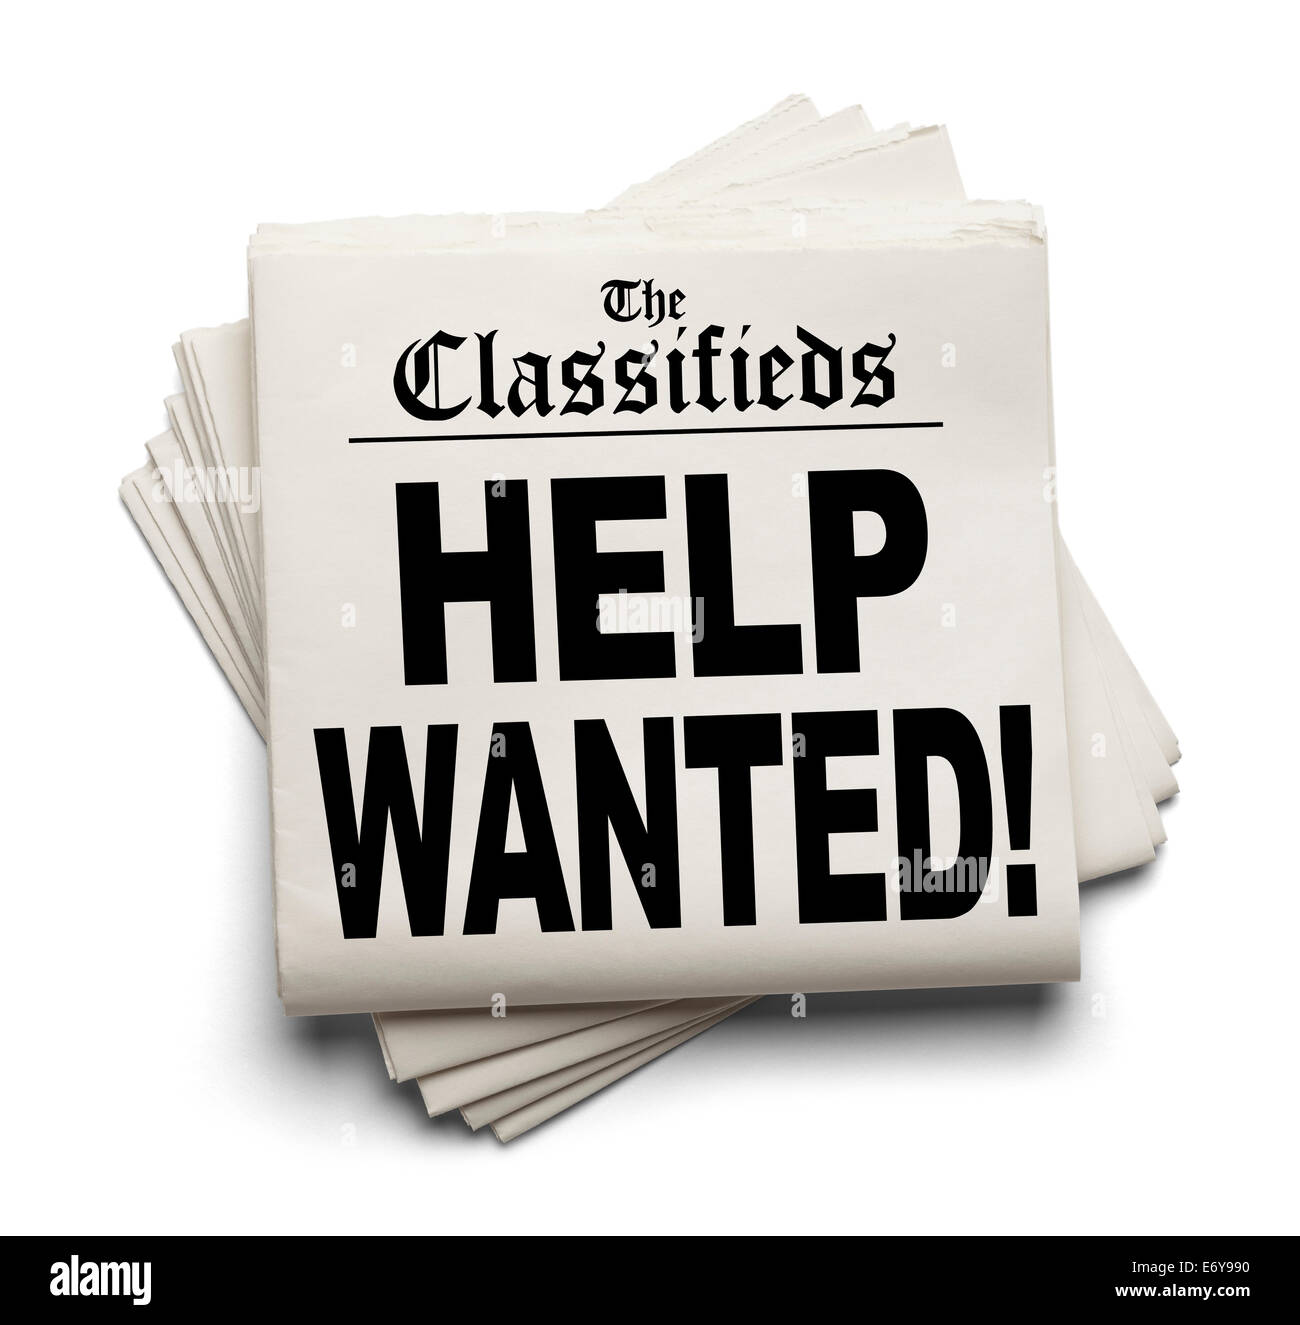 News Paper Classifieds Section Help Wanted Headline Isolated on White Background. Stock Photo